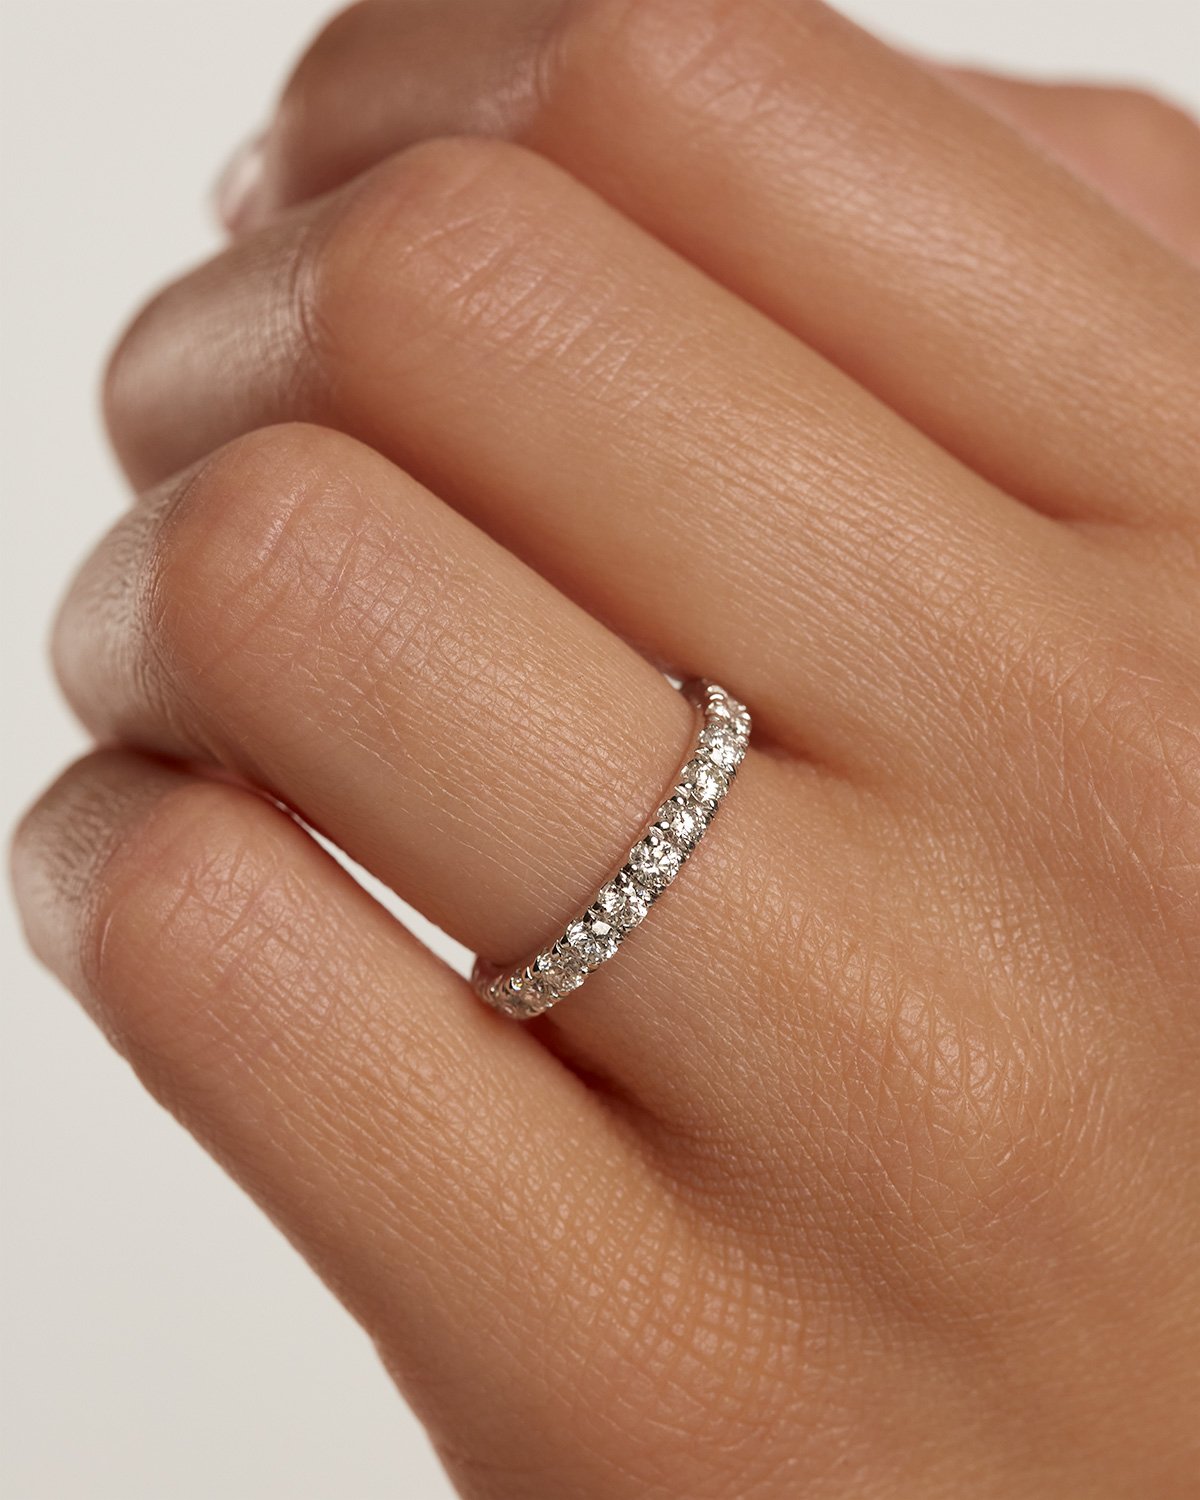 Diamonds and White Gold Eternity Supreme Ring - 18K solid white gold